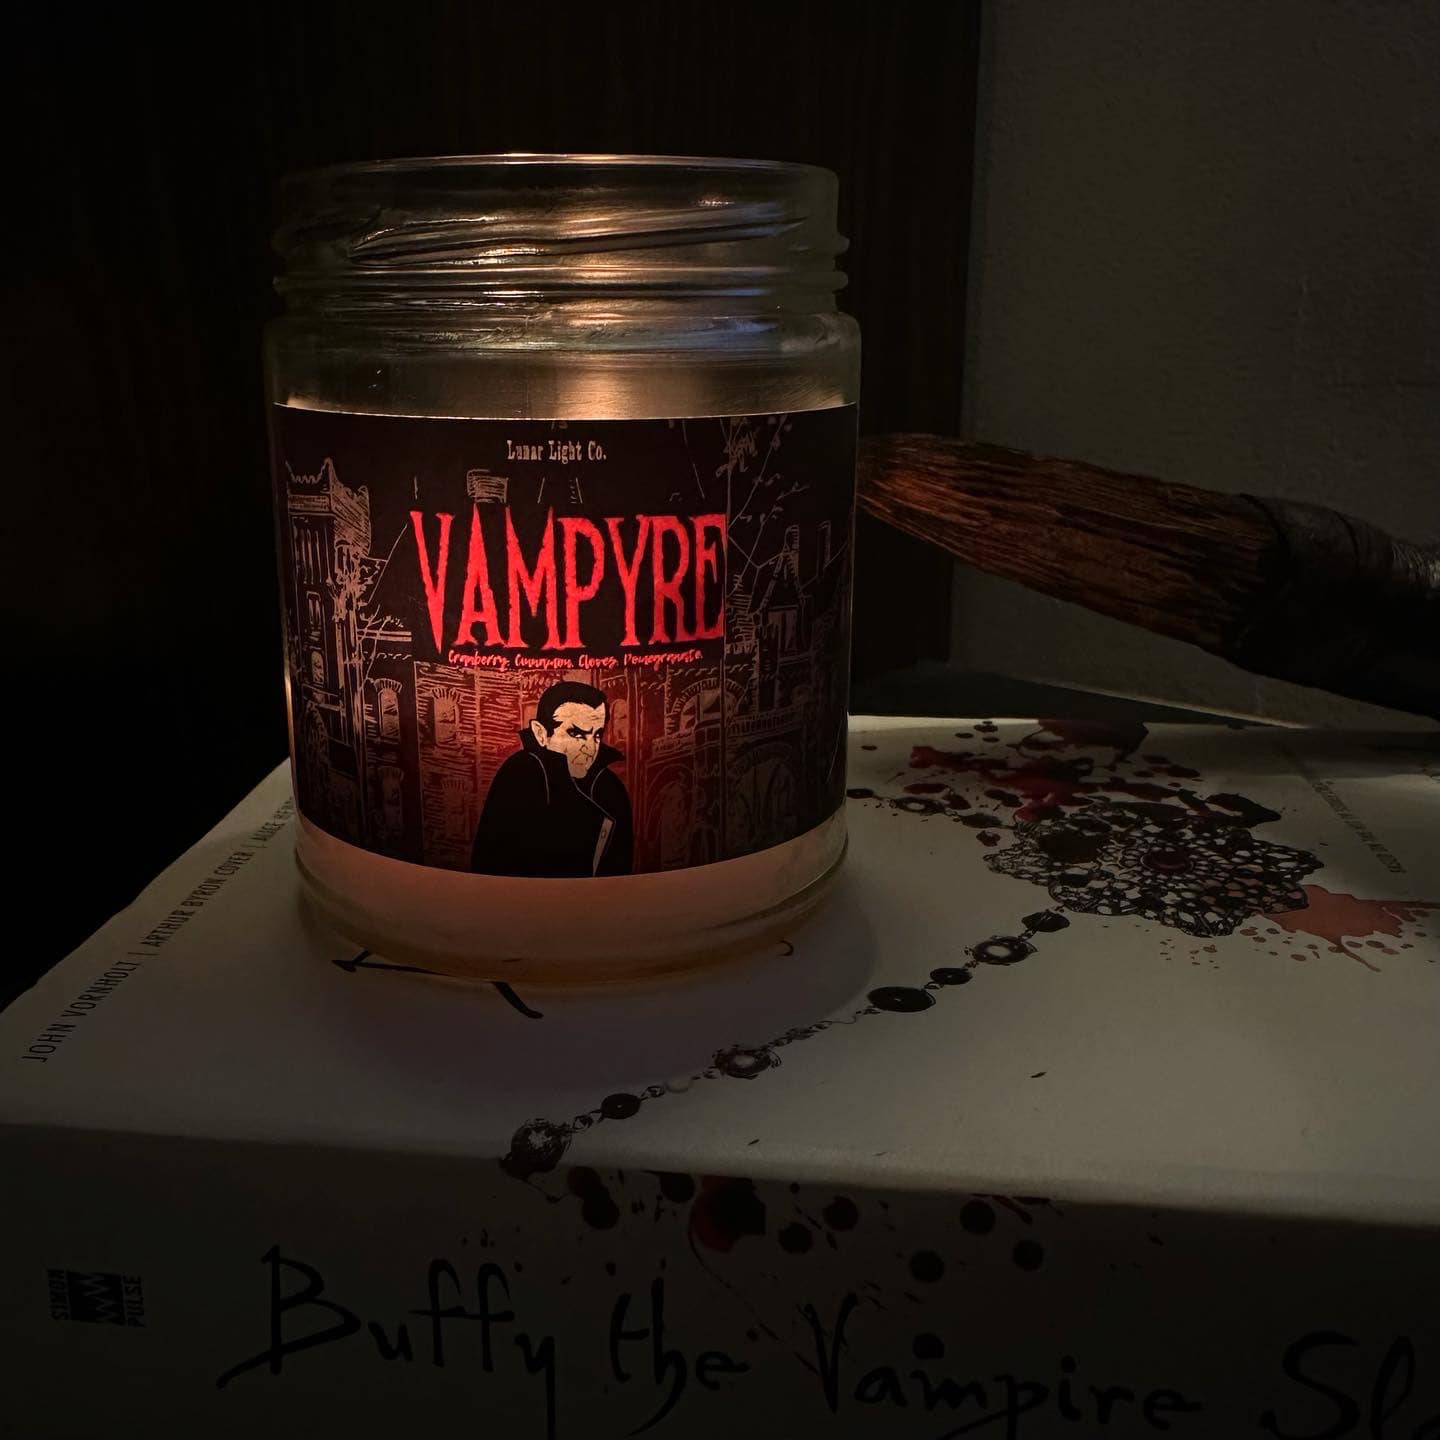 Vampyre Candle on Buffy the Vampire Slayer Book